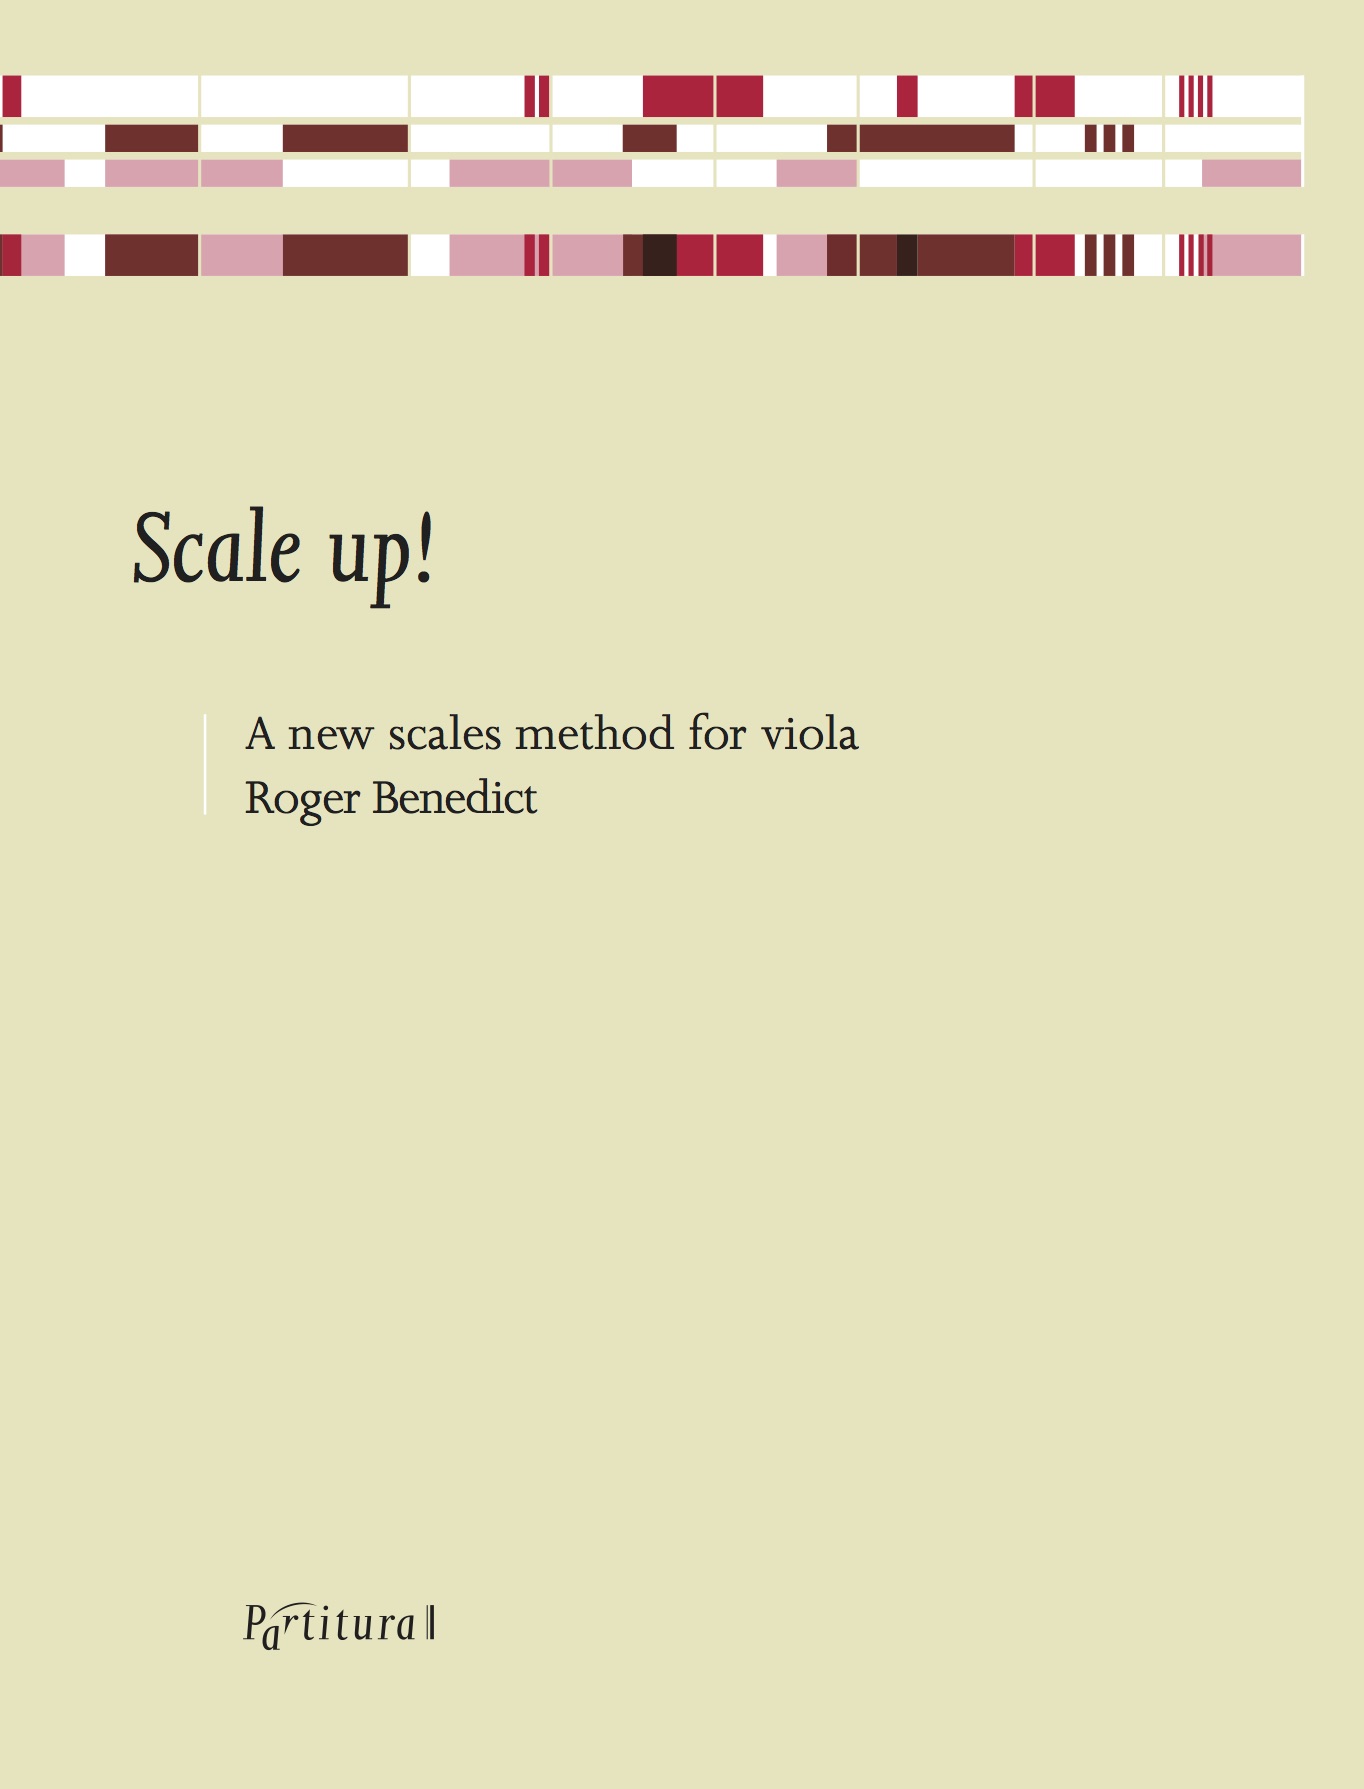 Scale up! A new scales method (viola)